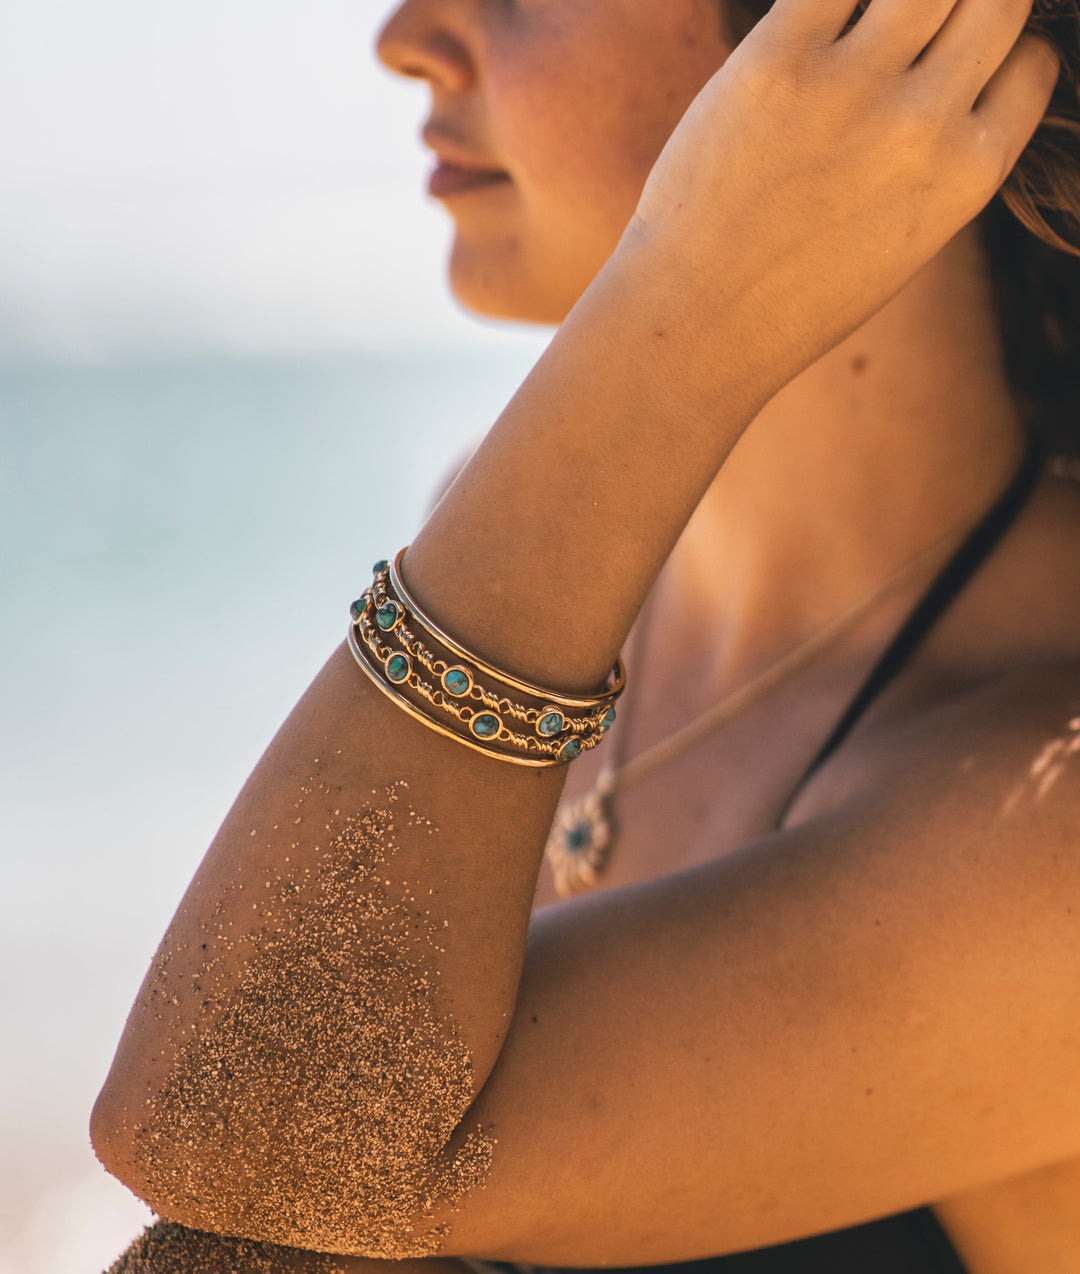 Sunshine & Sea Turquoise Stackable Bangles in 14K Yellow Gold Plated Sterling Silver